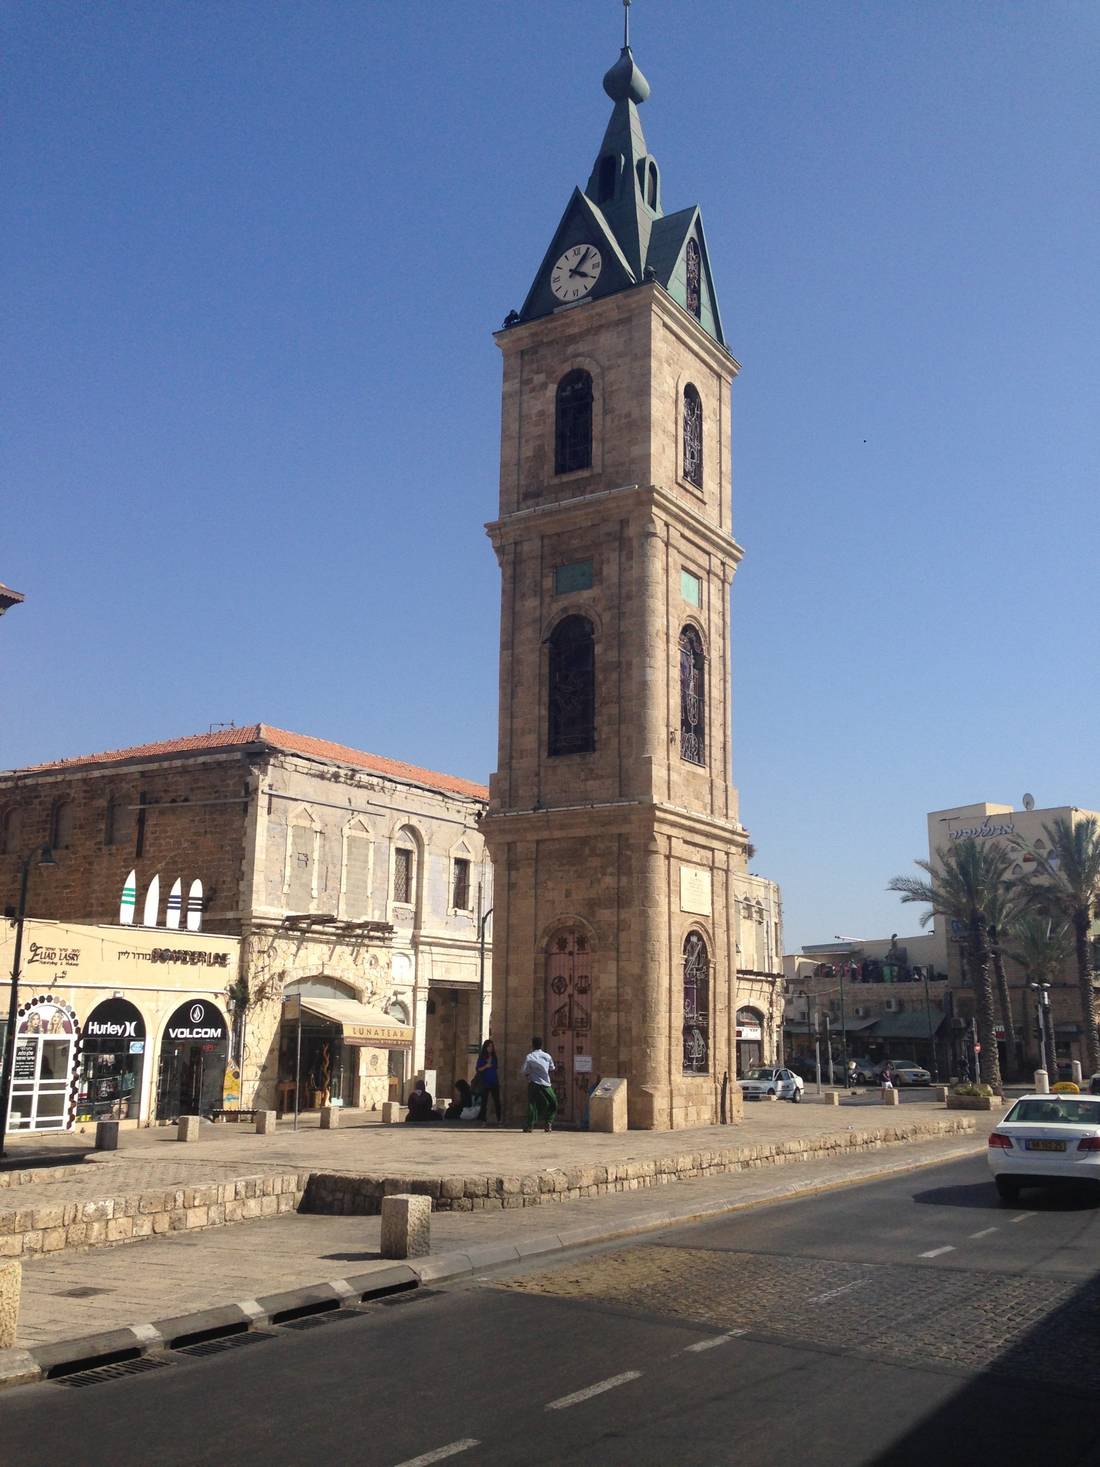 A clock tower in Tel Aviv, maybe it was in Jaffa....our friends picked us up at the clock tower to Caesarea!